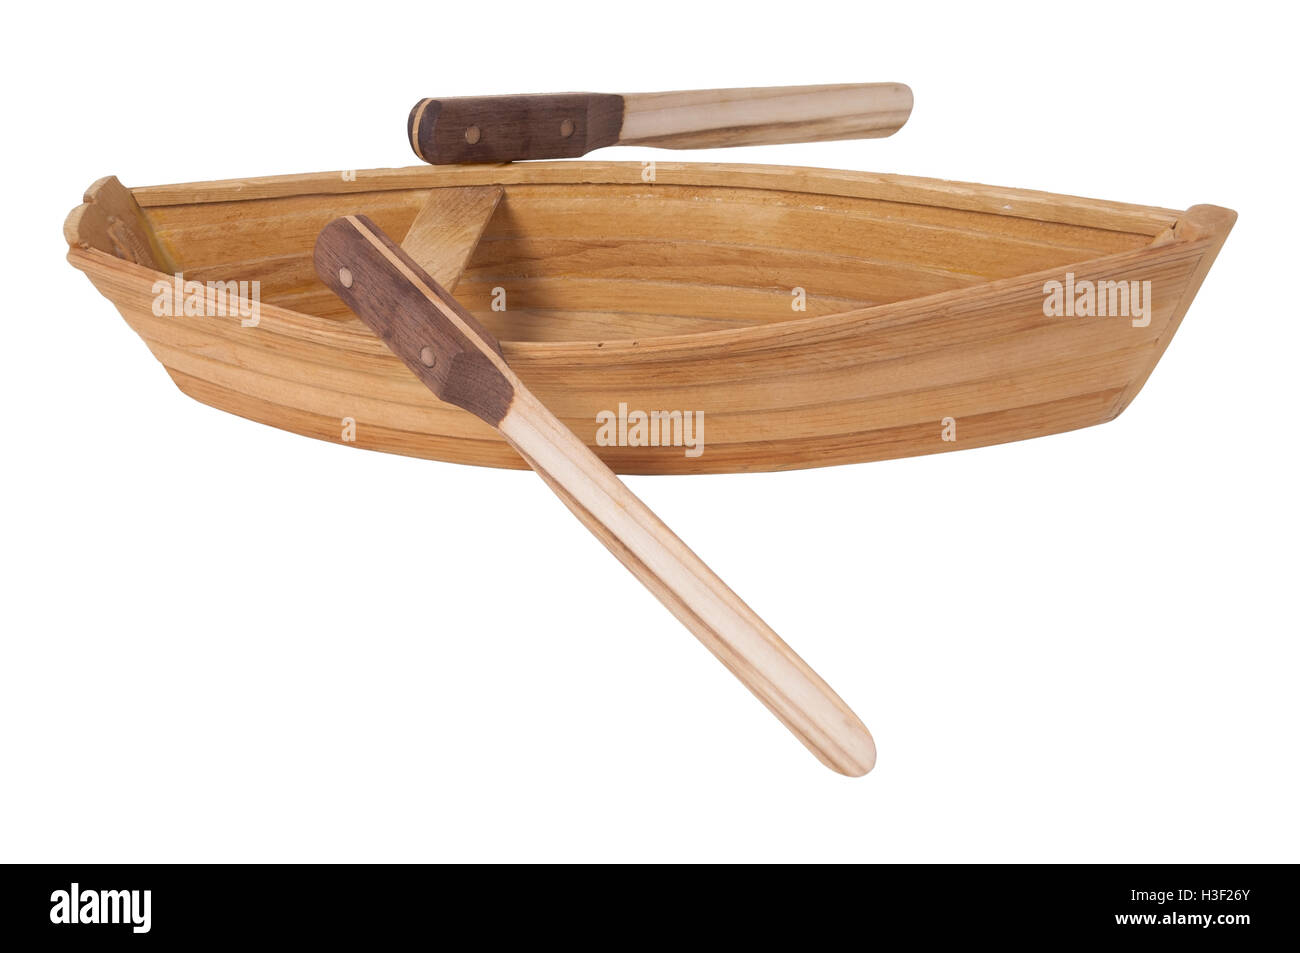 Wooden row boat with two toned wooden oars - path included Stock Photo